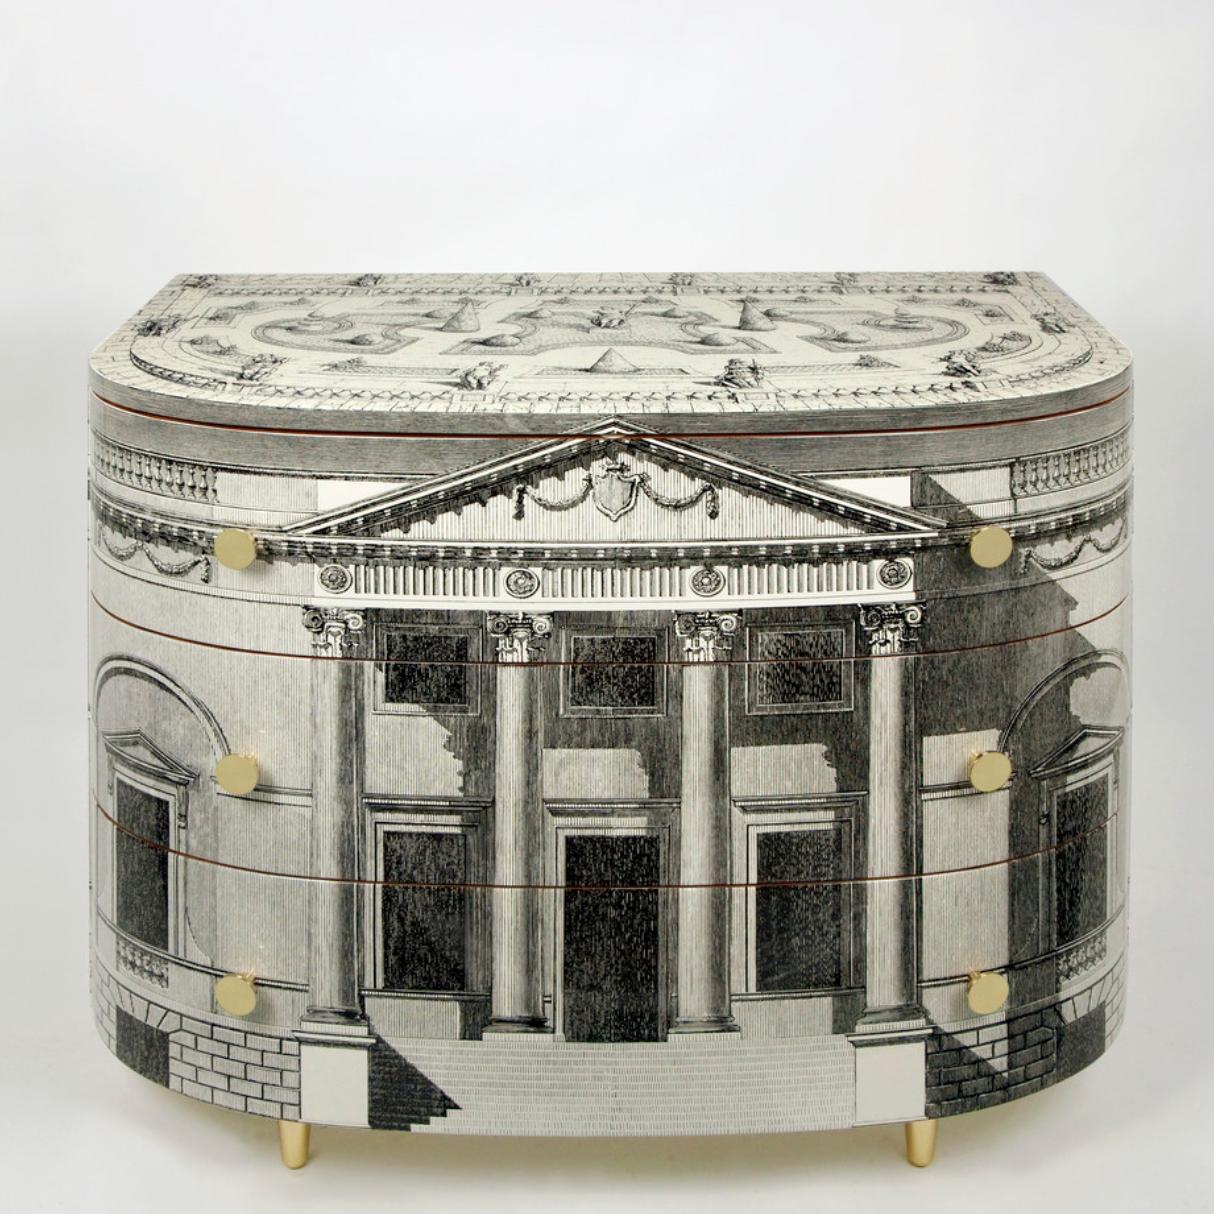 Italian 'Palladiana' Architectural Chest of Drawers by Fornasetti